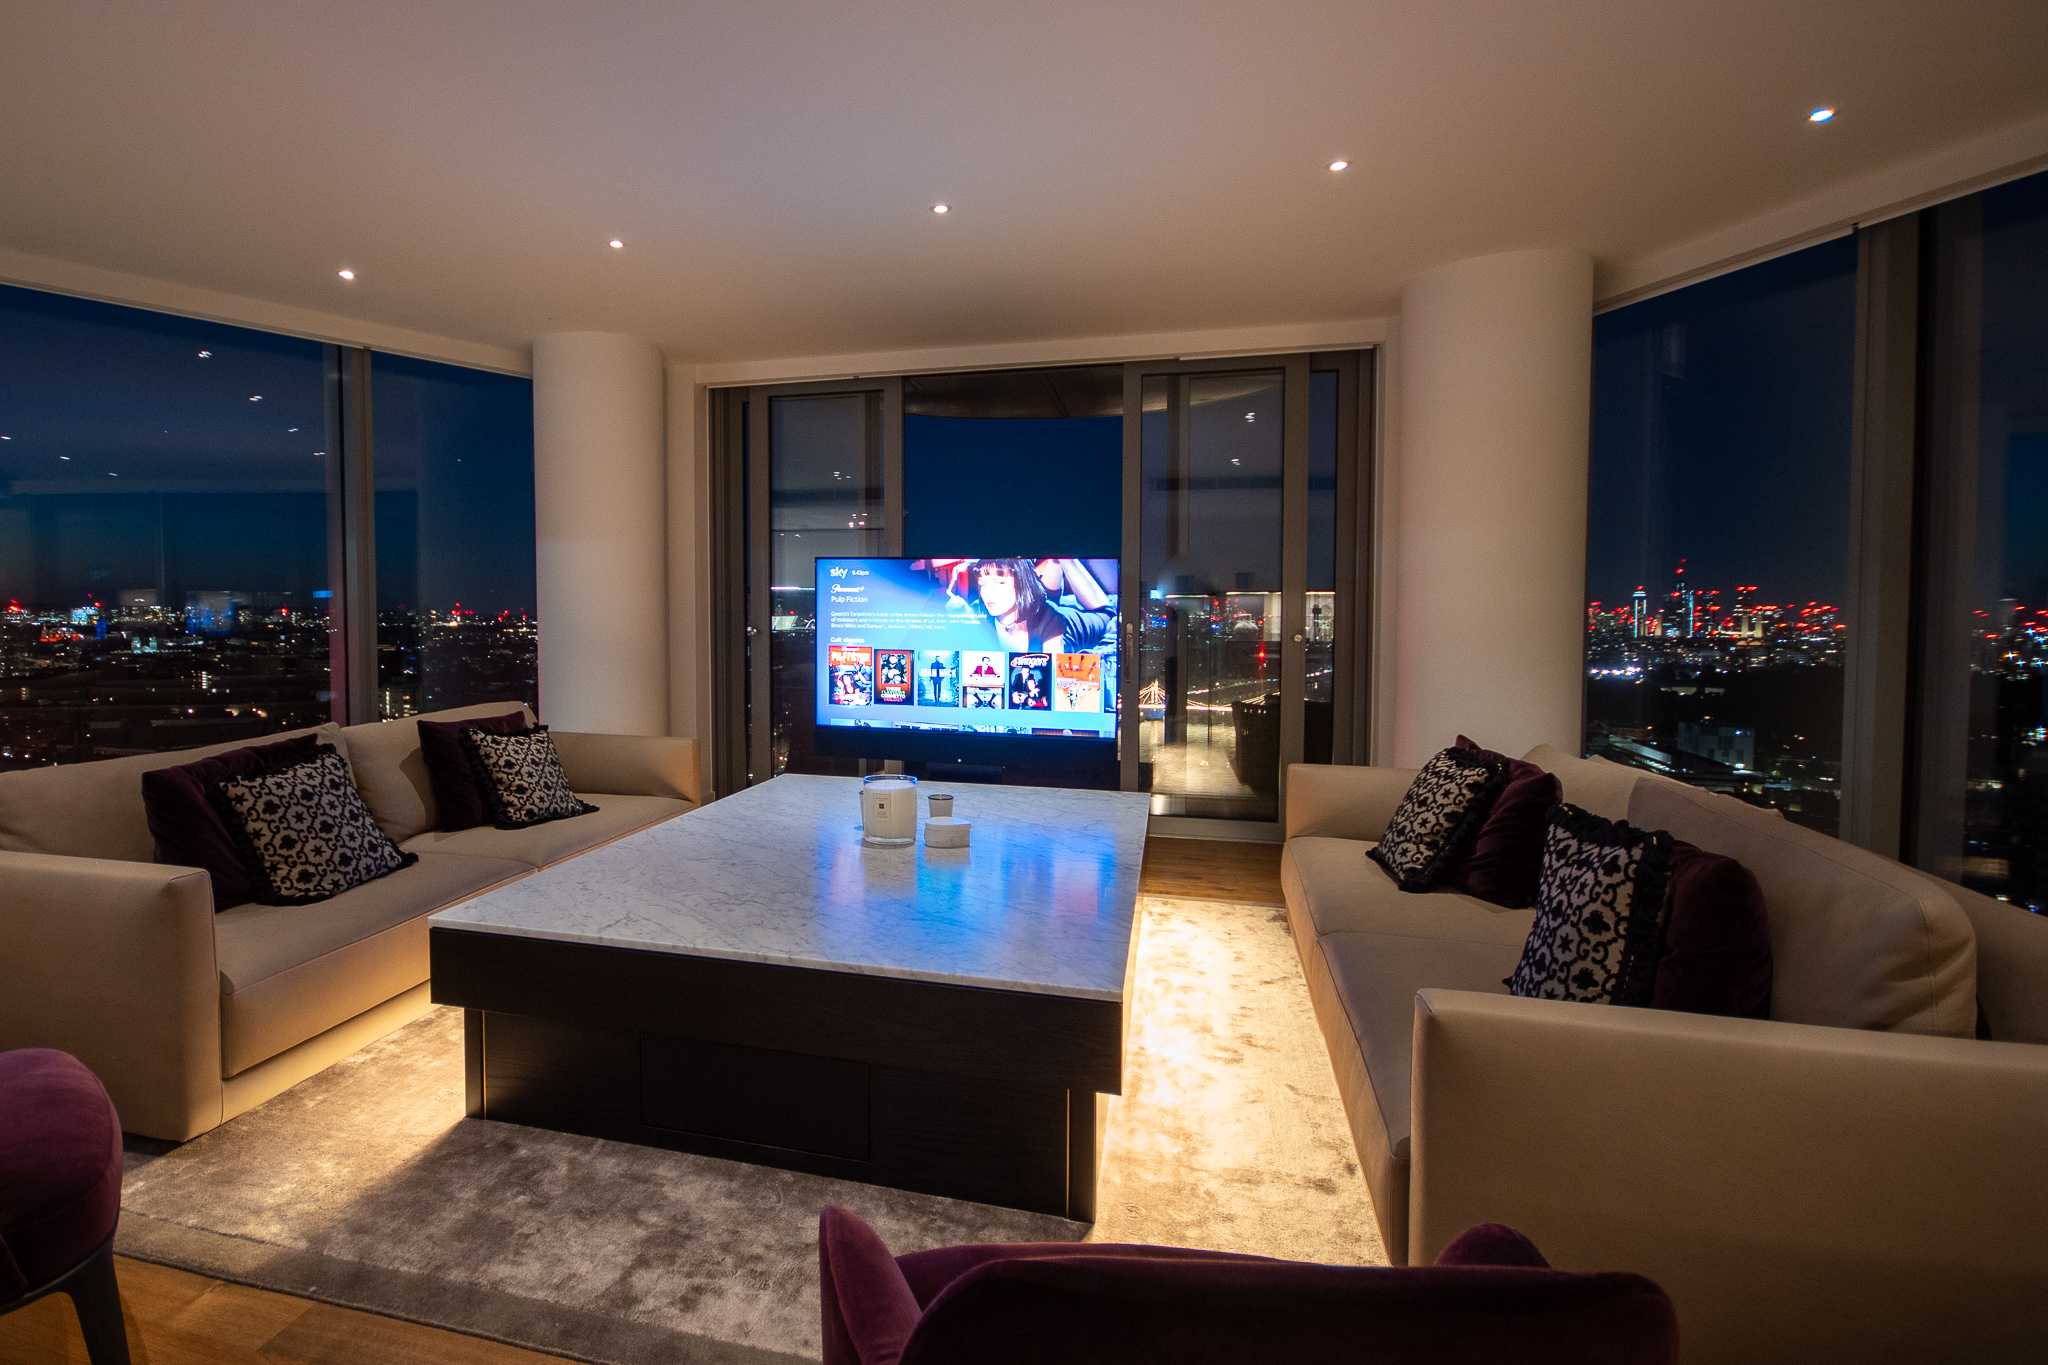 Bespoke Coffee table with motorised TV lift installed and designed by Modal AV